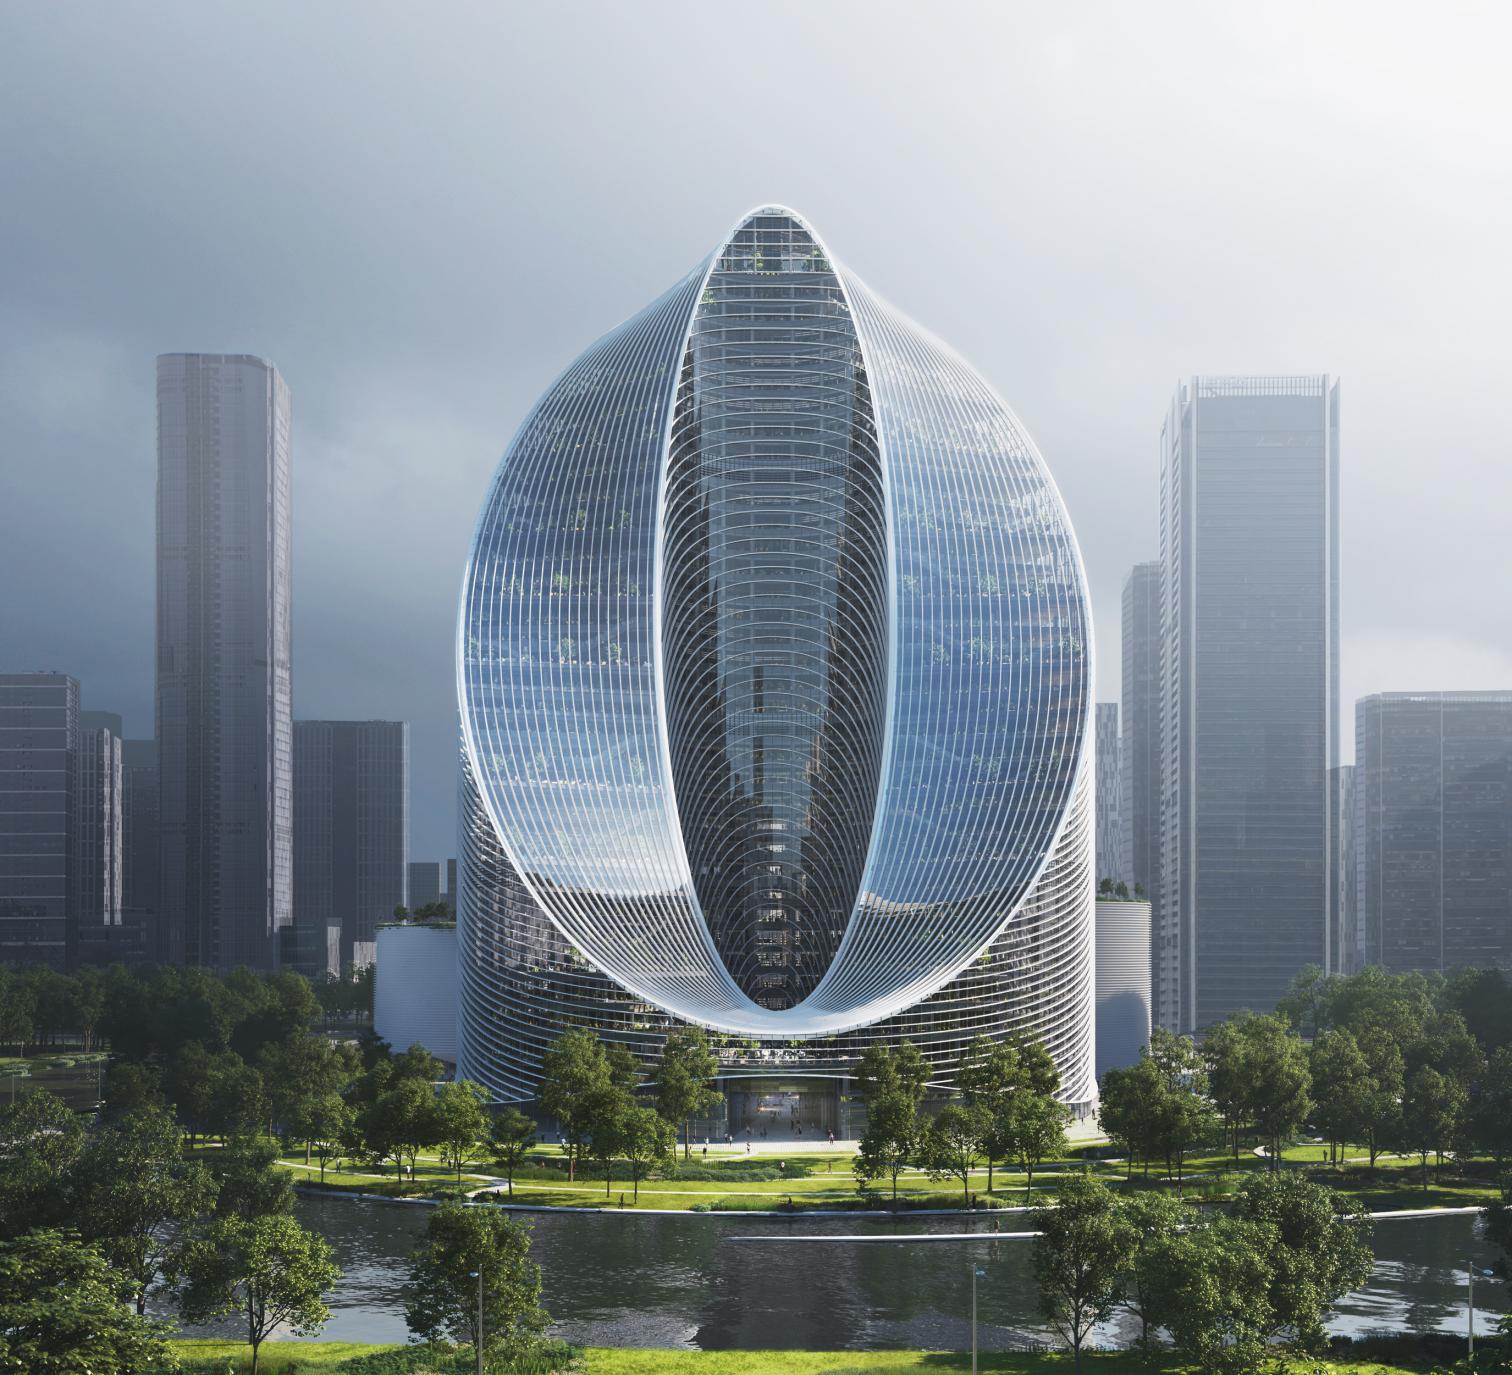 nvidia-s-new-translucent-hq-wants-to-one-up-apple-s-spectacular-ispaceship